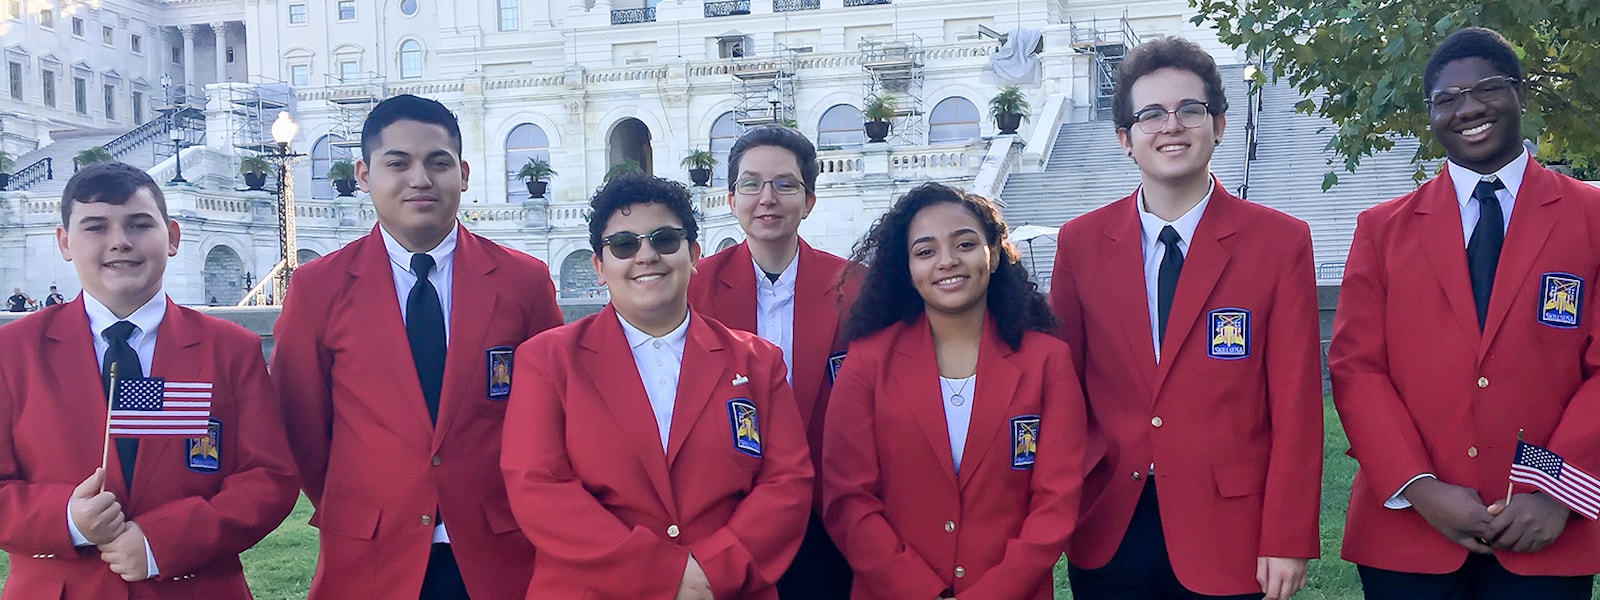 Willow Canyon students poses for a picture in Washington D.C. as part of their SkillsUSA Leadership Training.